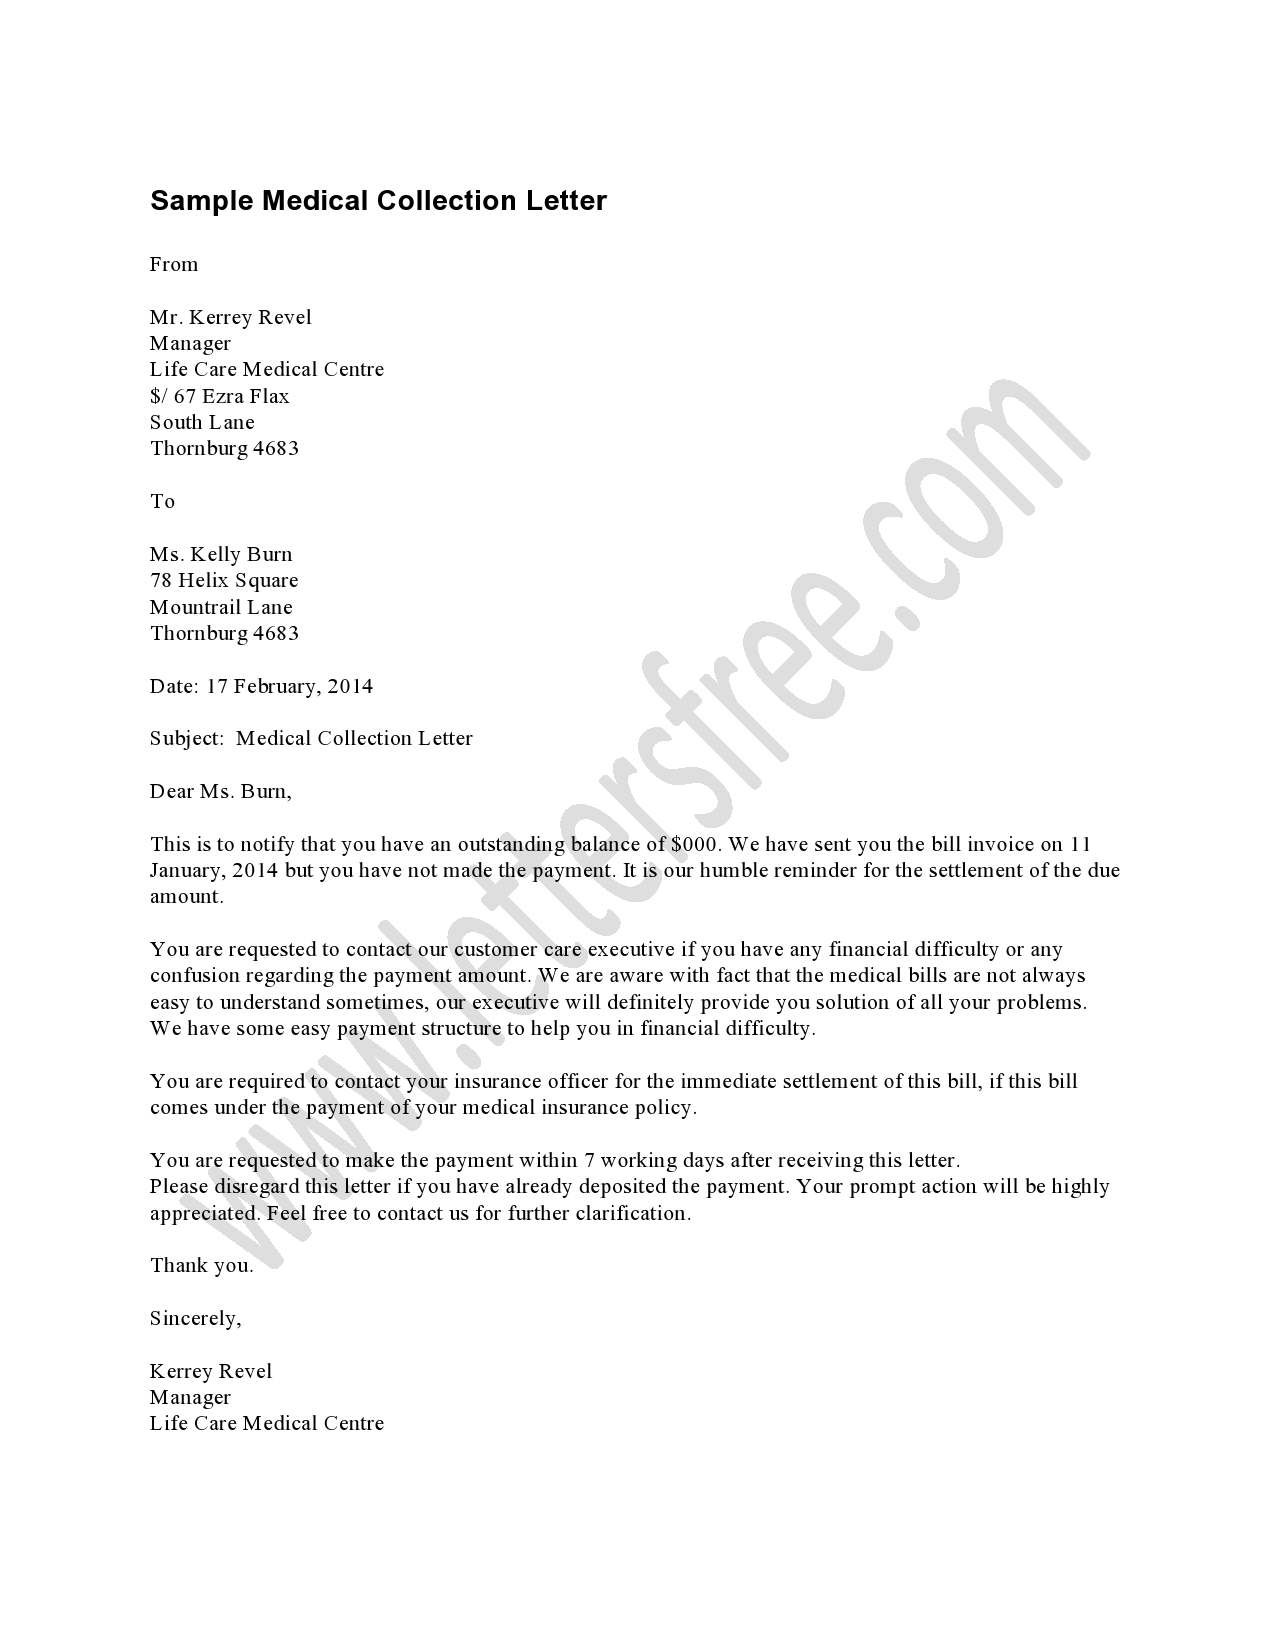 hipaa letter medical collection template Collection-Collections letter template for business gallery business cards ideas best of collections letter template for business 19-b